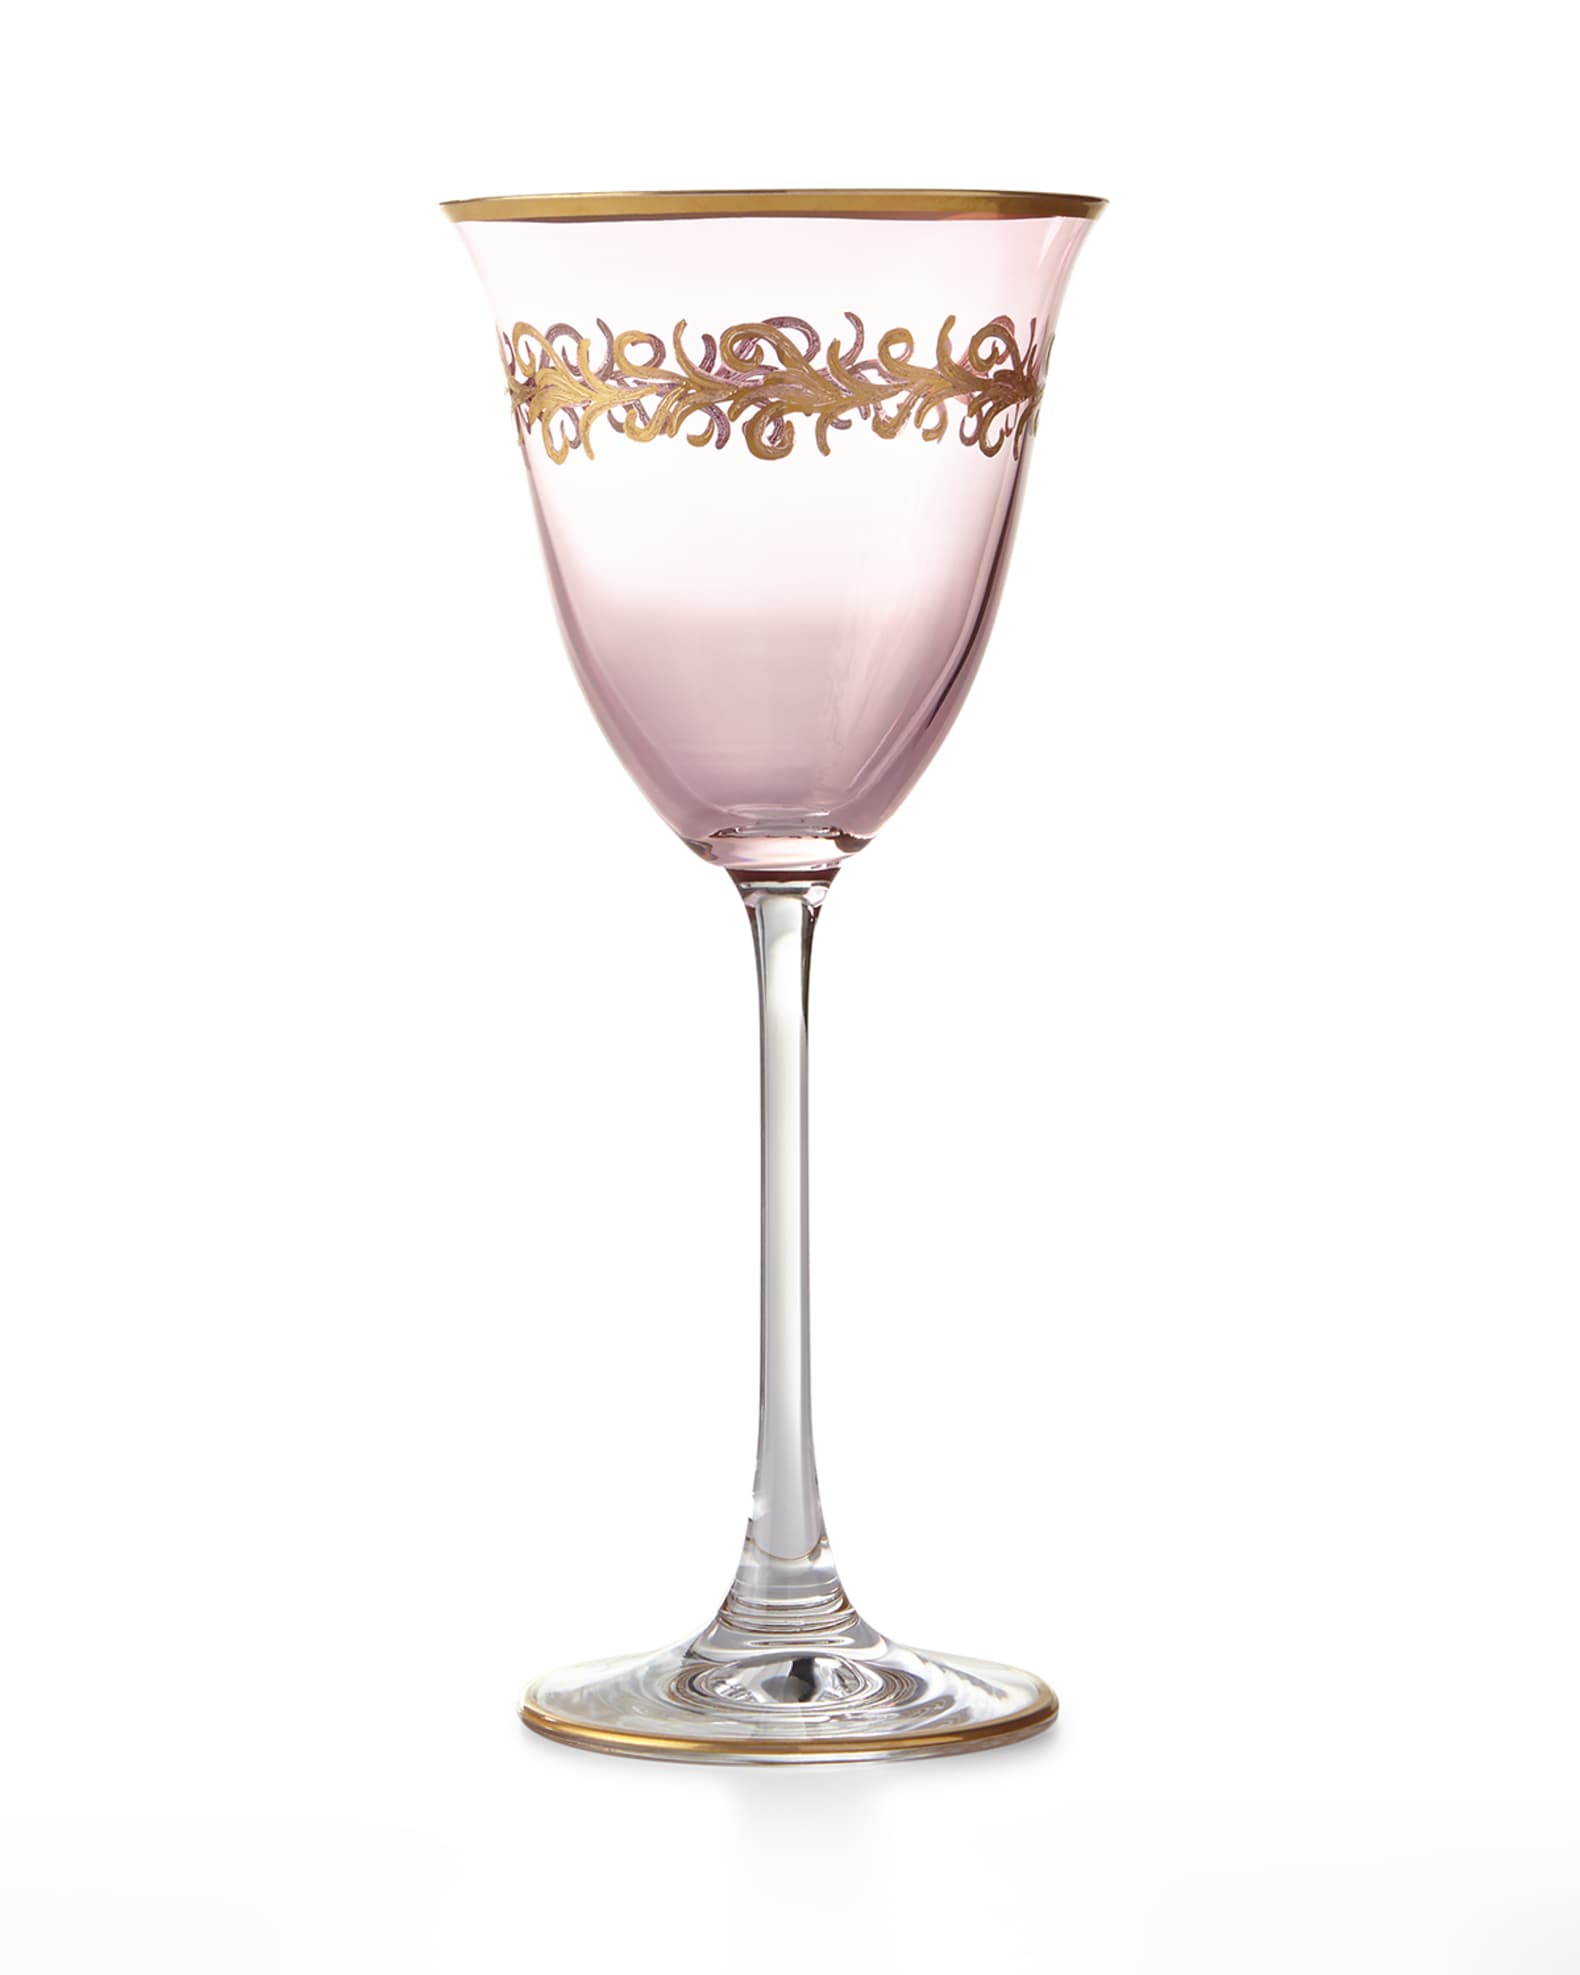 Blush & Gold Drinkware and Cocktail Glasses